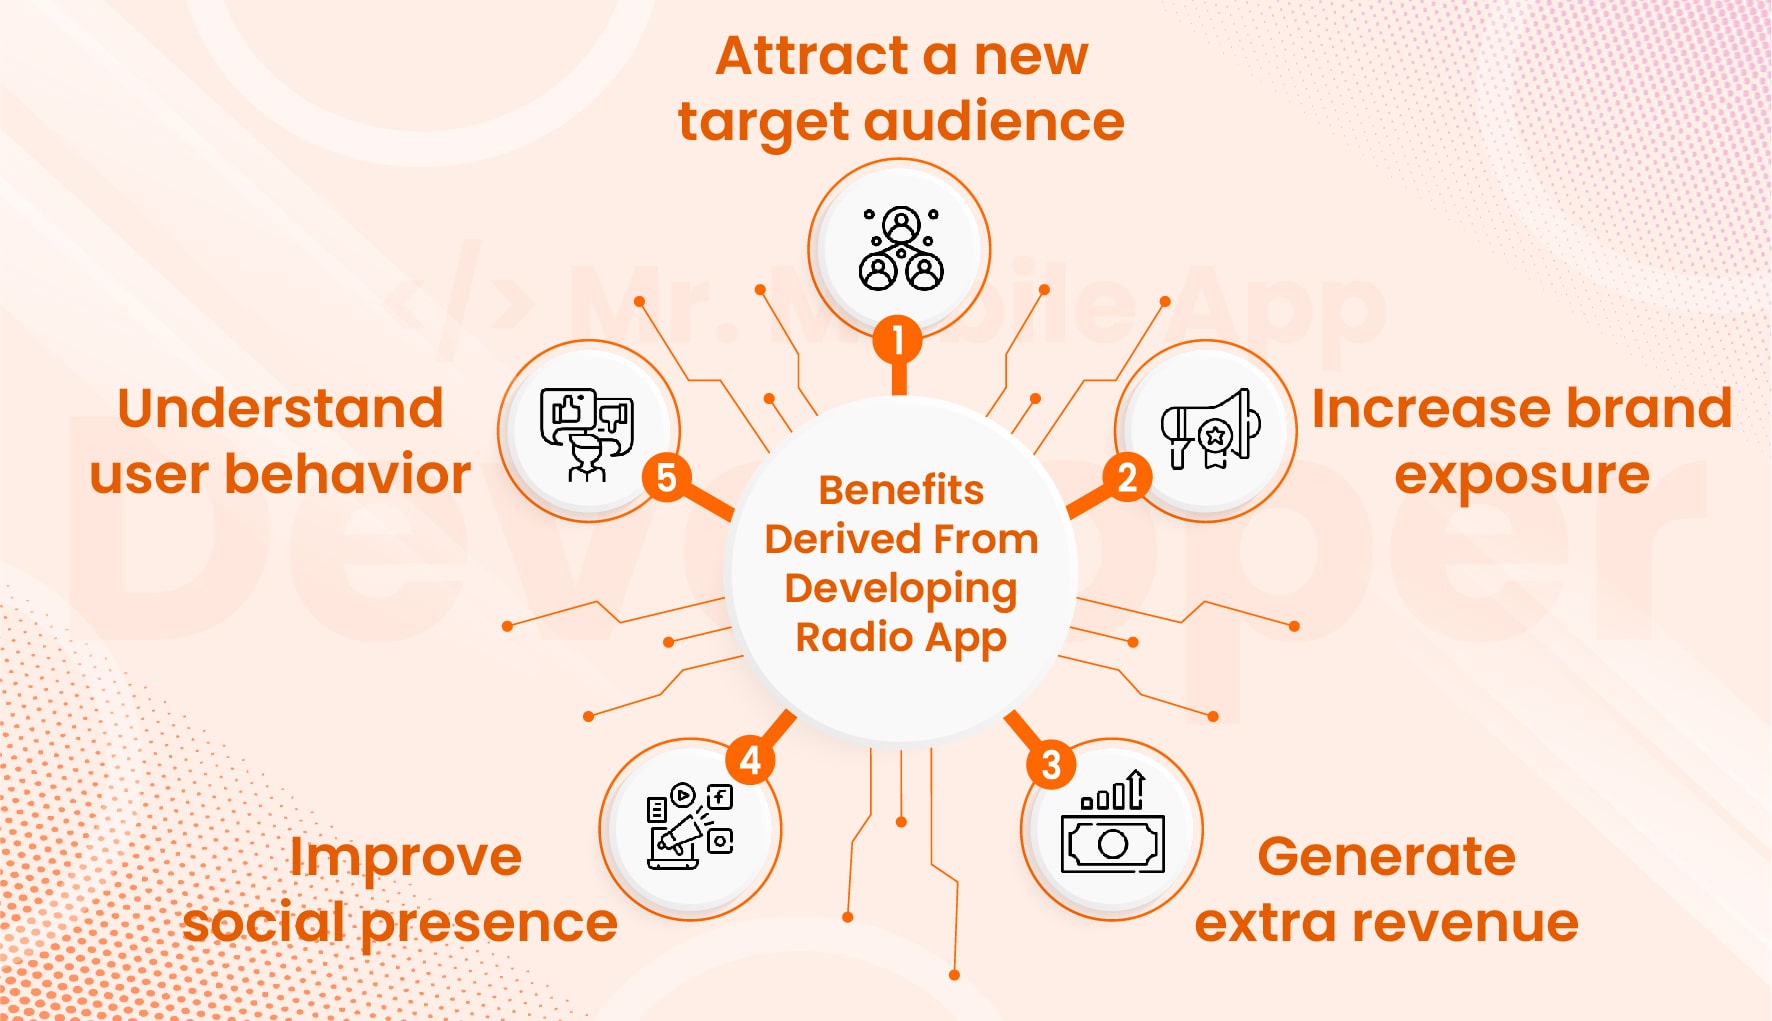 Benefits Derived From Developing Radio App